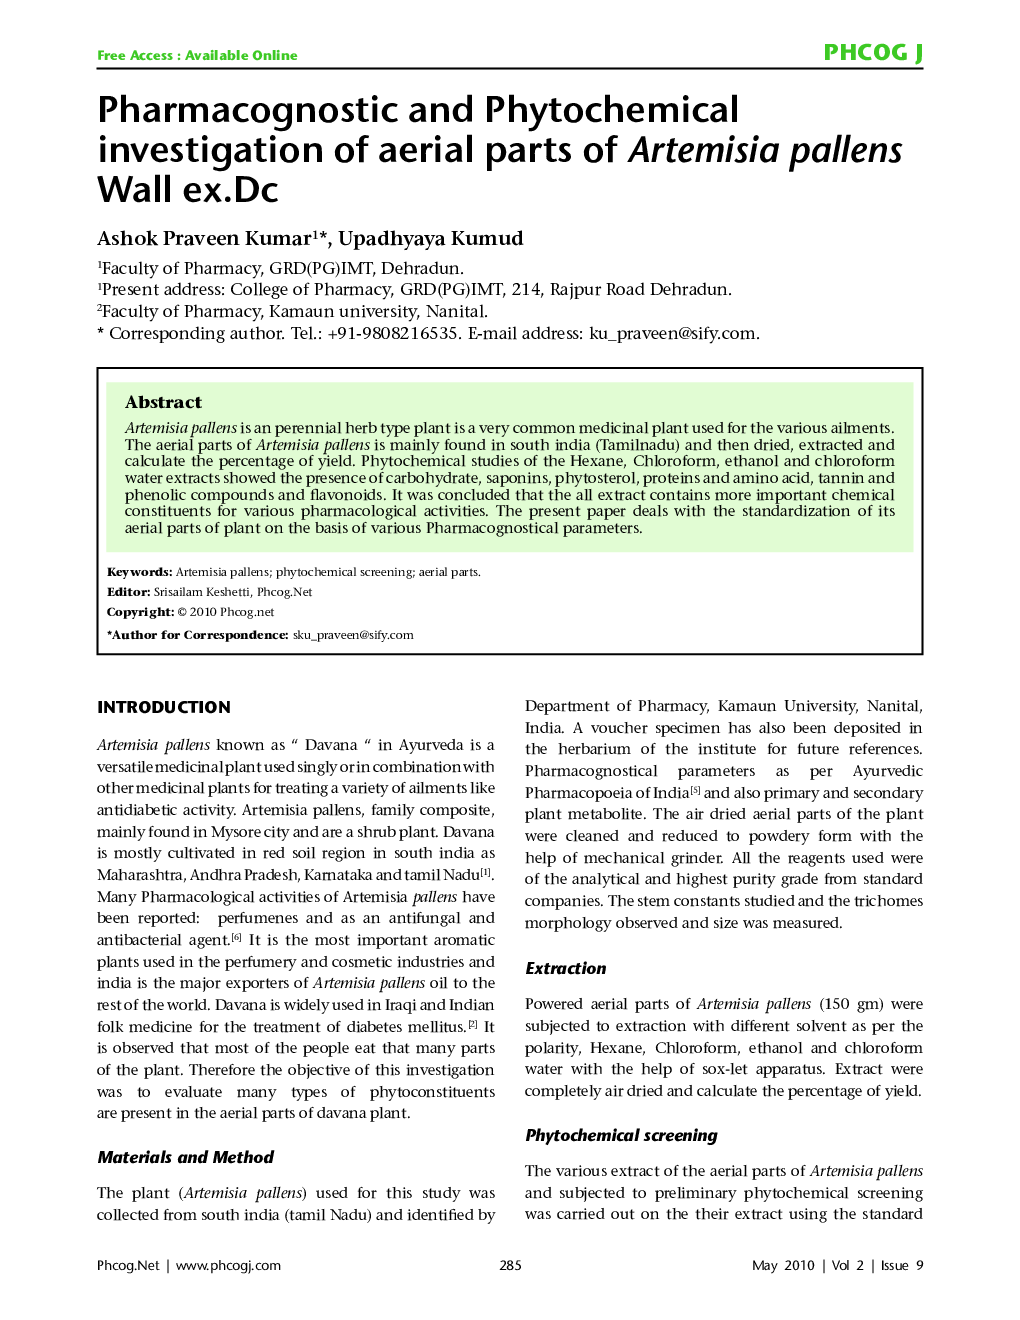 Pharmacognostic and Phytochemical investigation of aerial parts of Artemisia pallens Wall ex.Dc